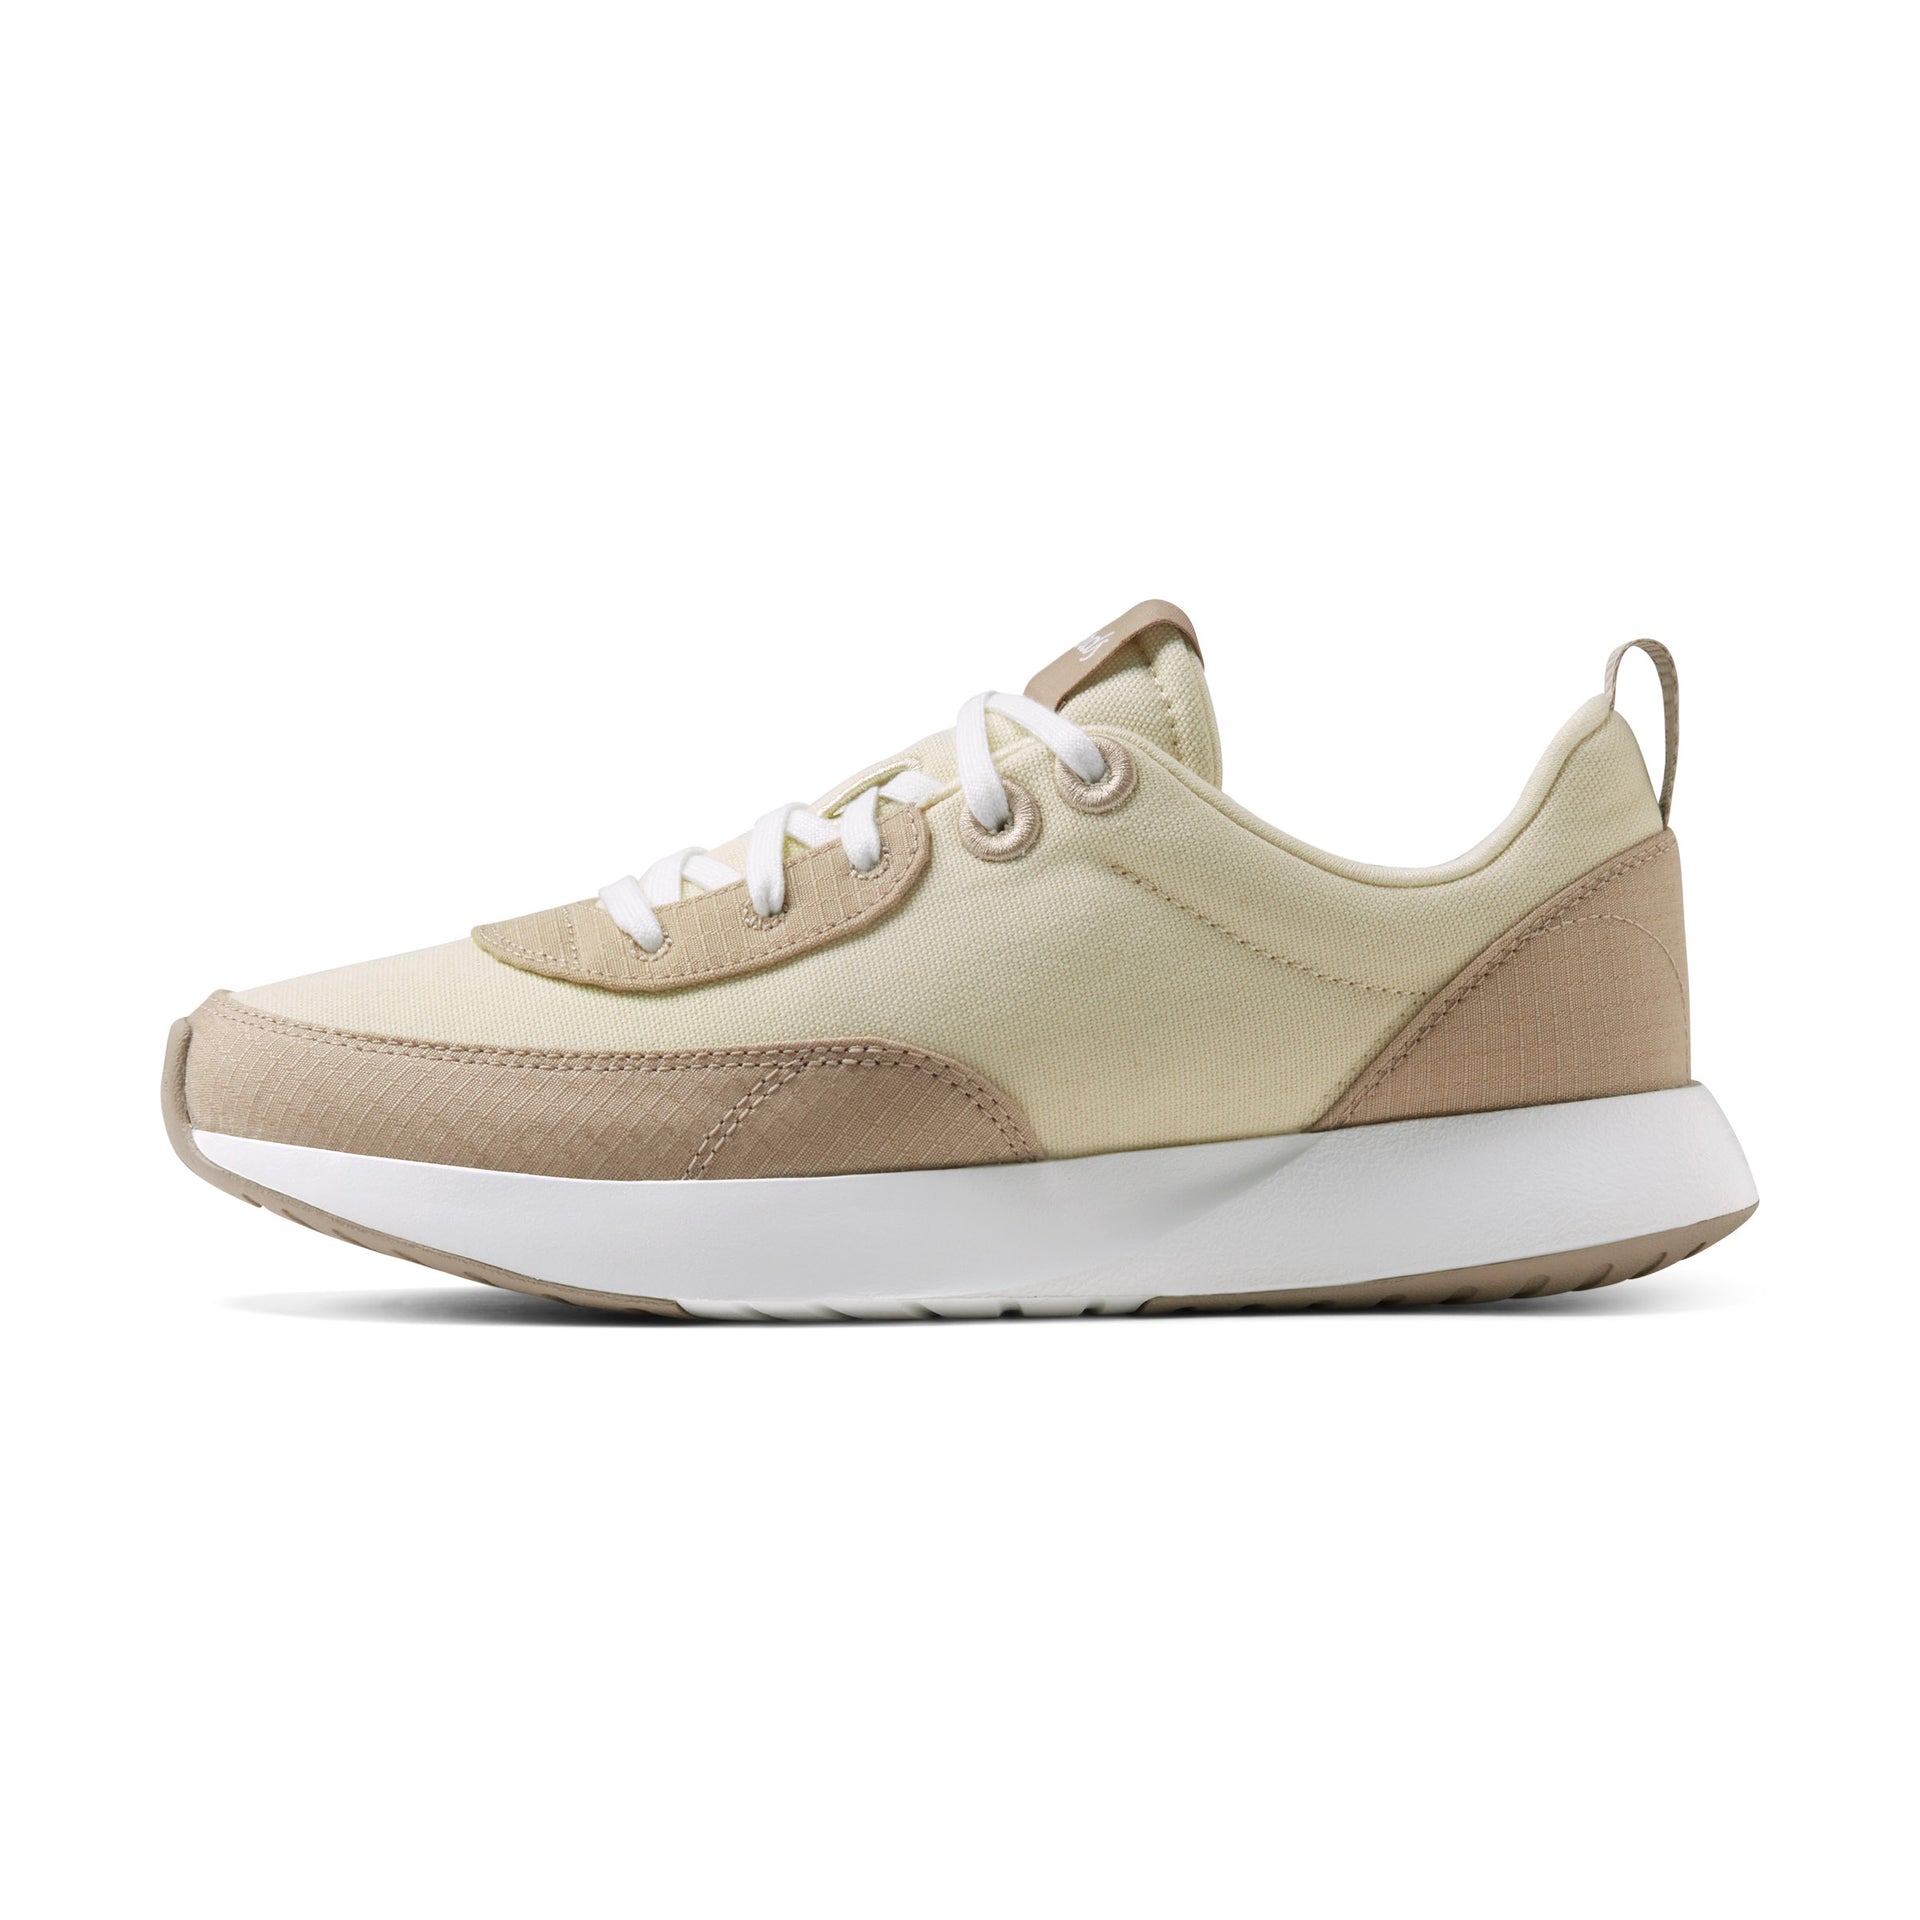 Couriers pour femmes - Stony Cream (Rugged Beige)